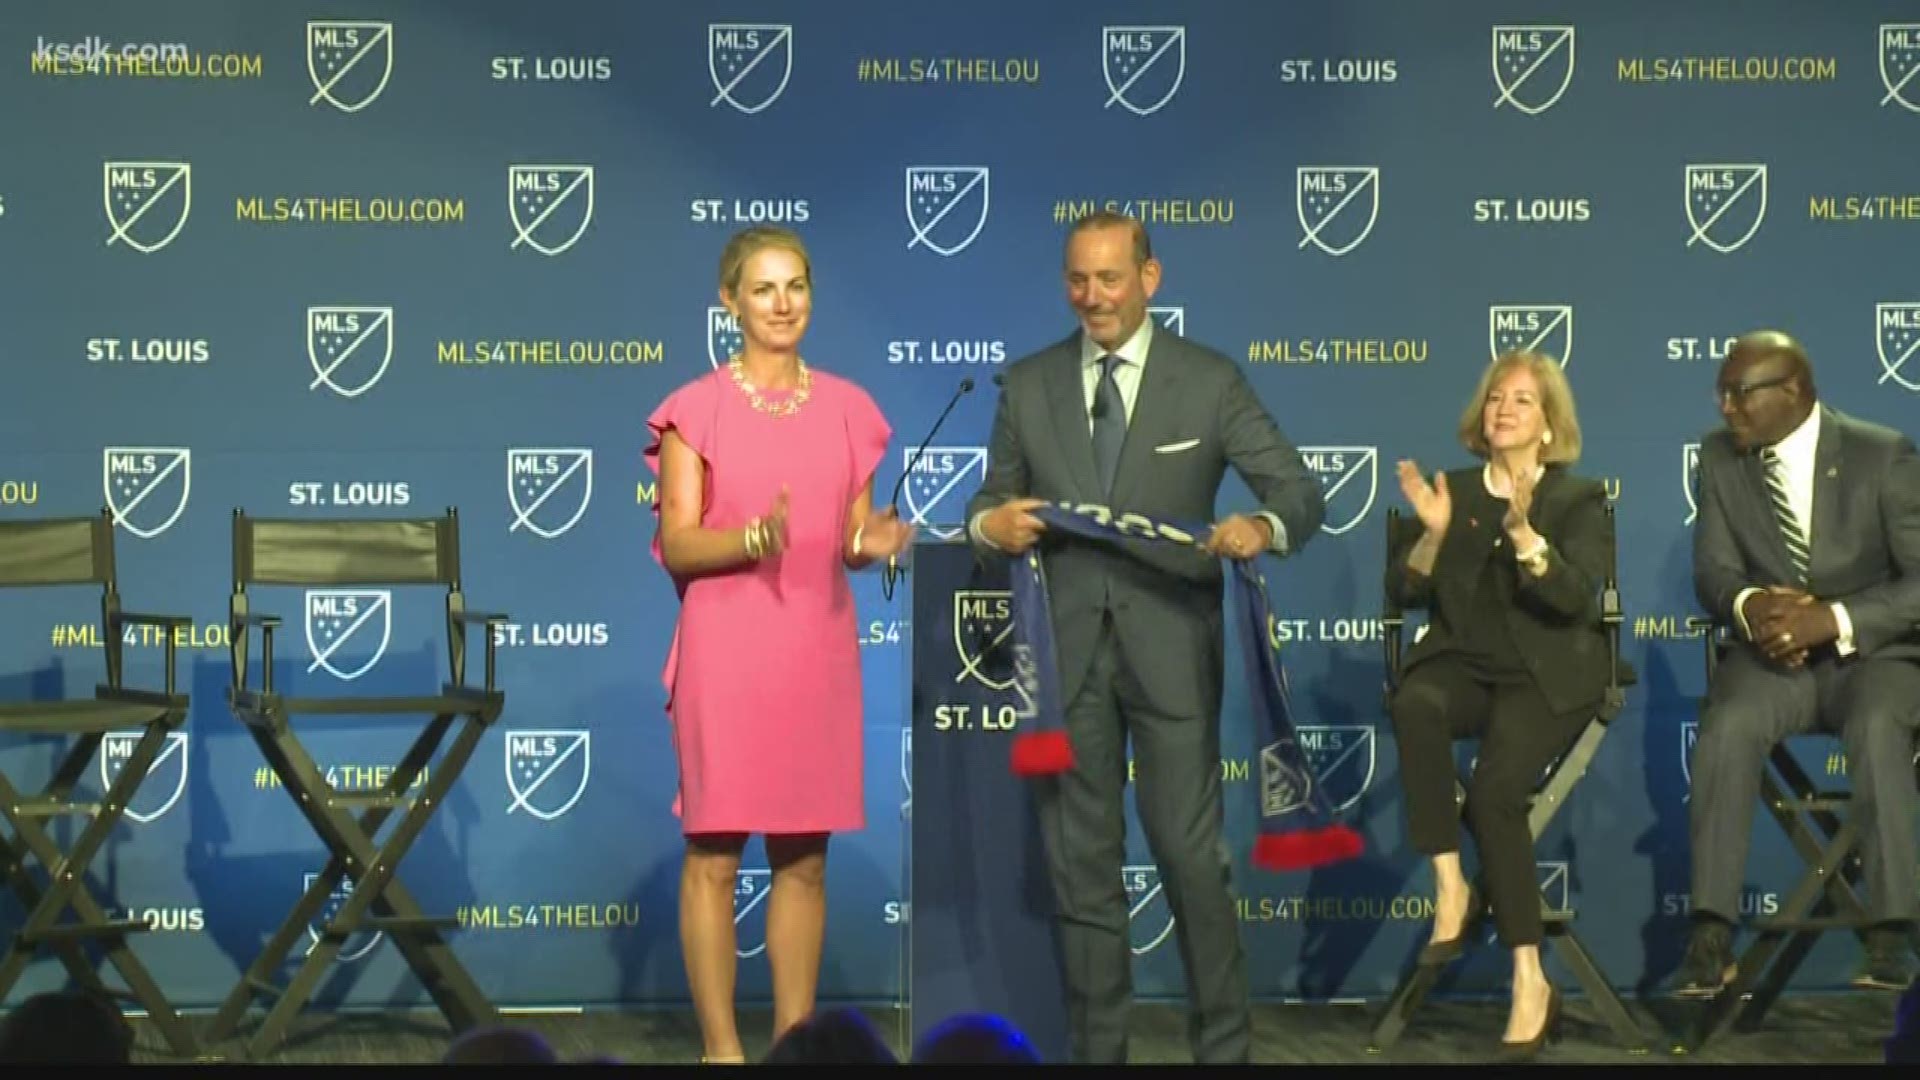 Carolyn Kindle breaks ground for women at newest MLS club